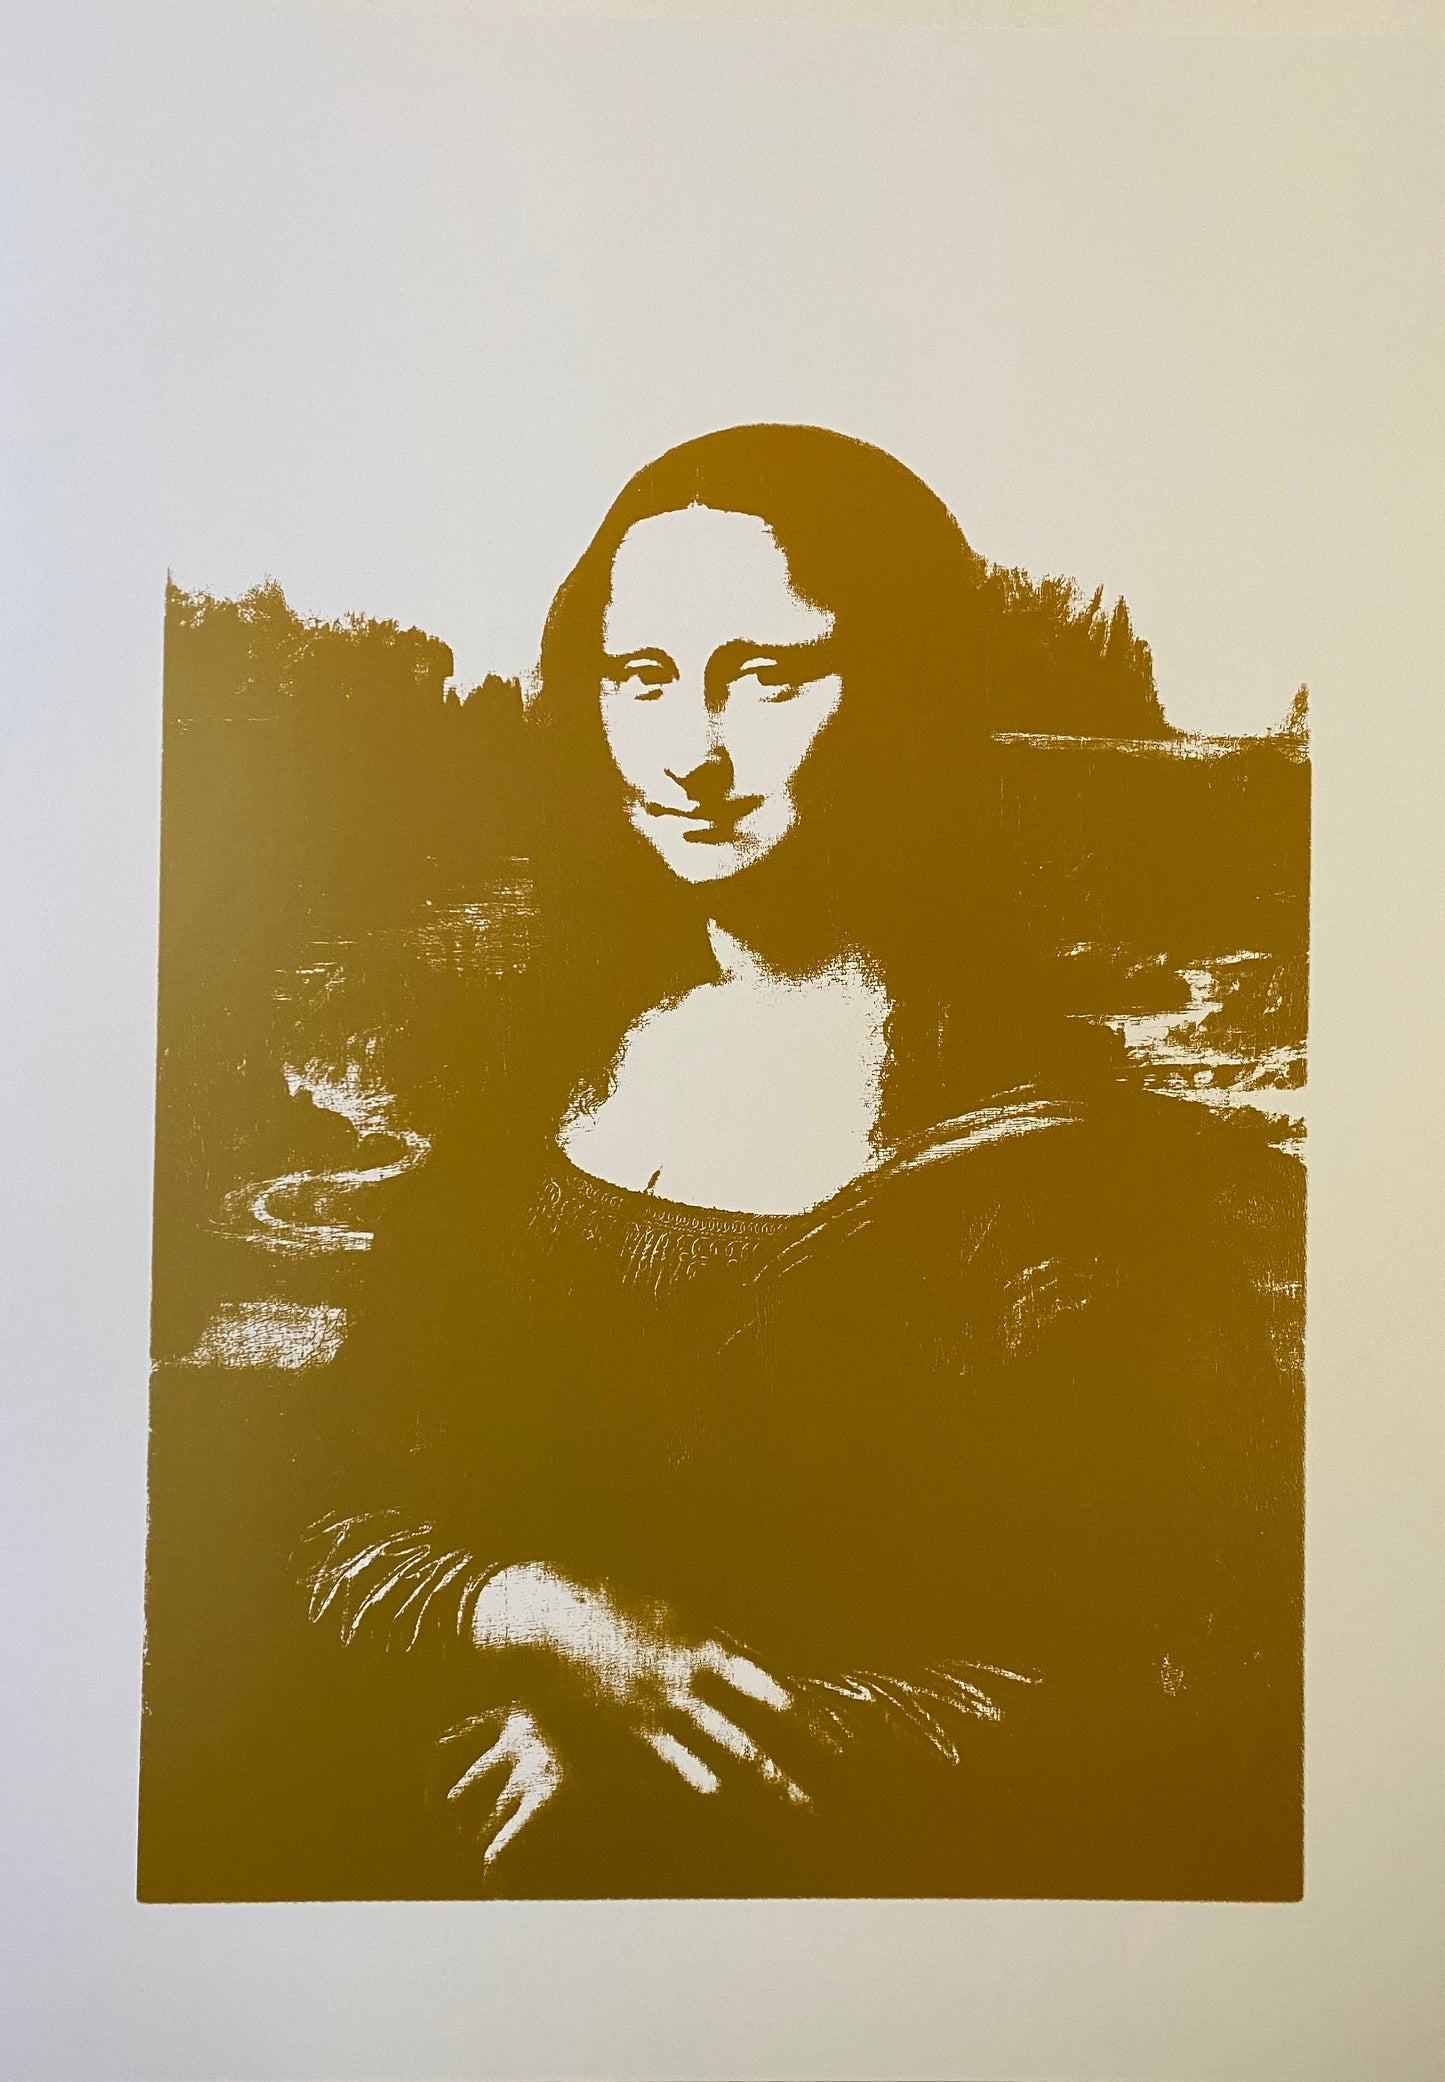 this is an image of a sunday b morning screenprint after andy warhol titled 'mona lisa gold on white'. this artwork features a screenprint image of the mona lisa in gold ink on a white background. this is a sunday b morning print for sale.